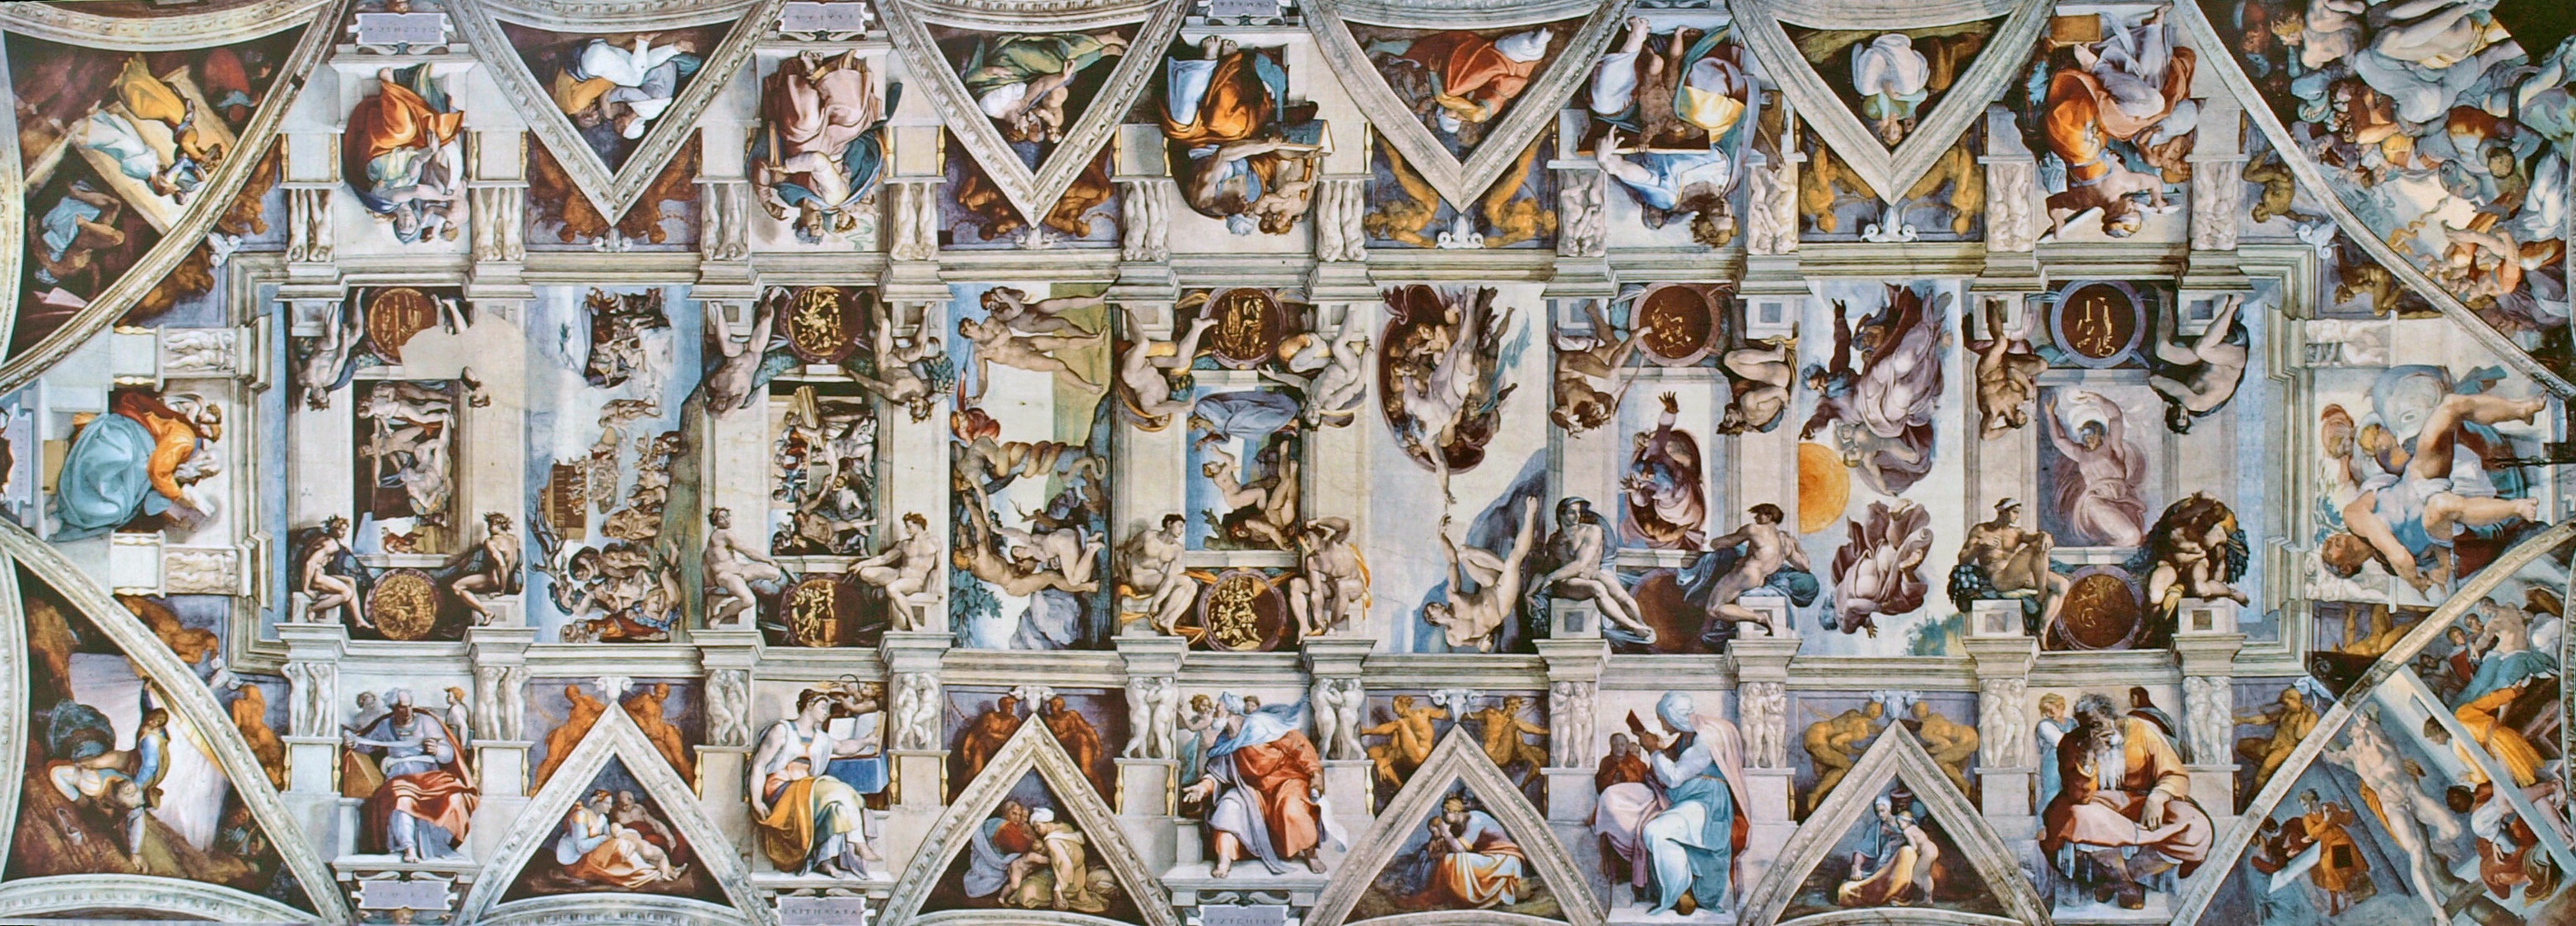 Michelangelo, CC BY-SA 3.0 <https://creativecommons.org/licenses/by-sa/3.0>, via Wikimedia Commons